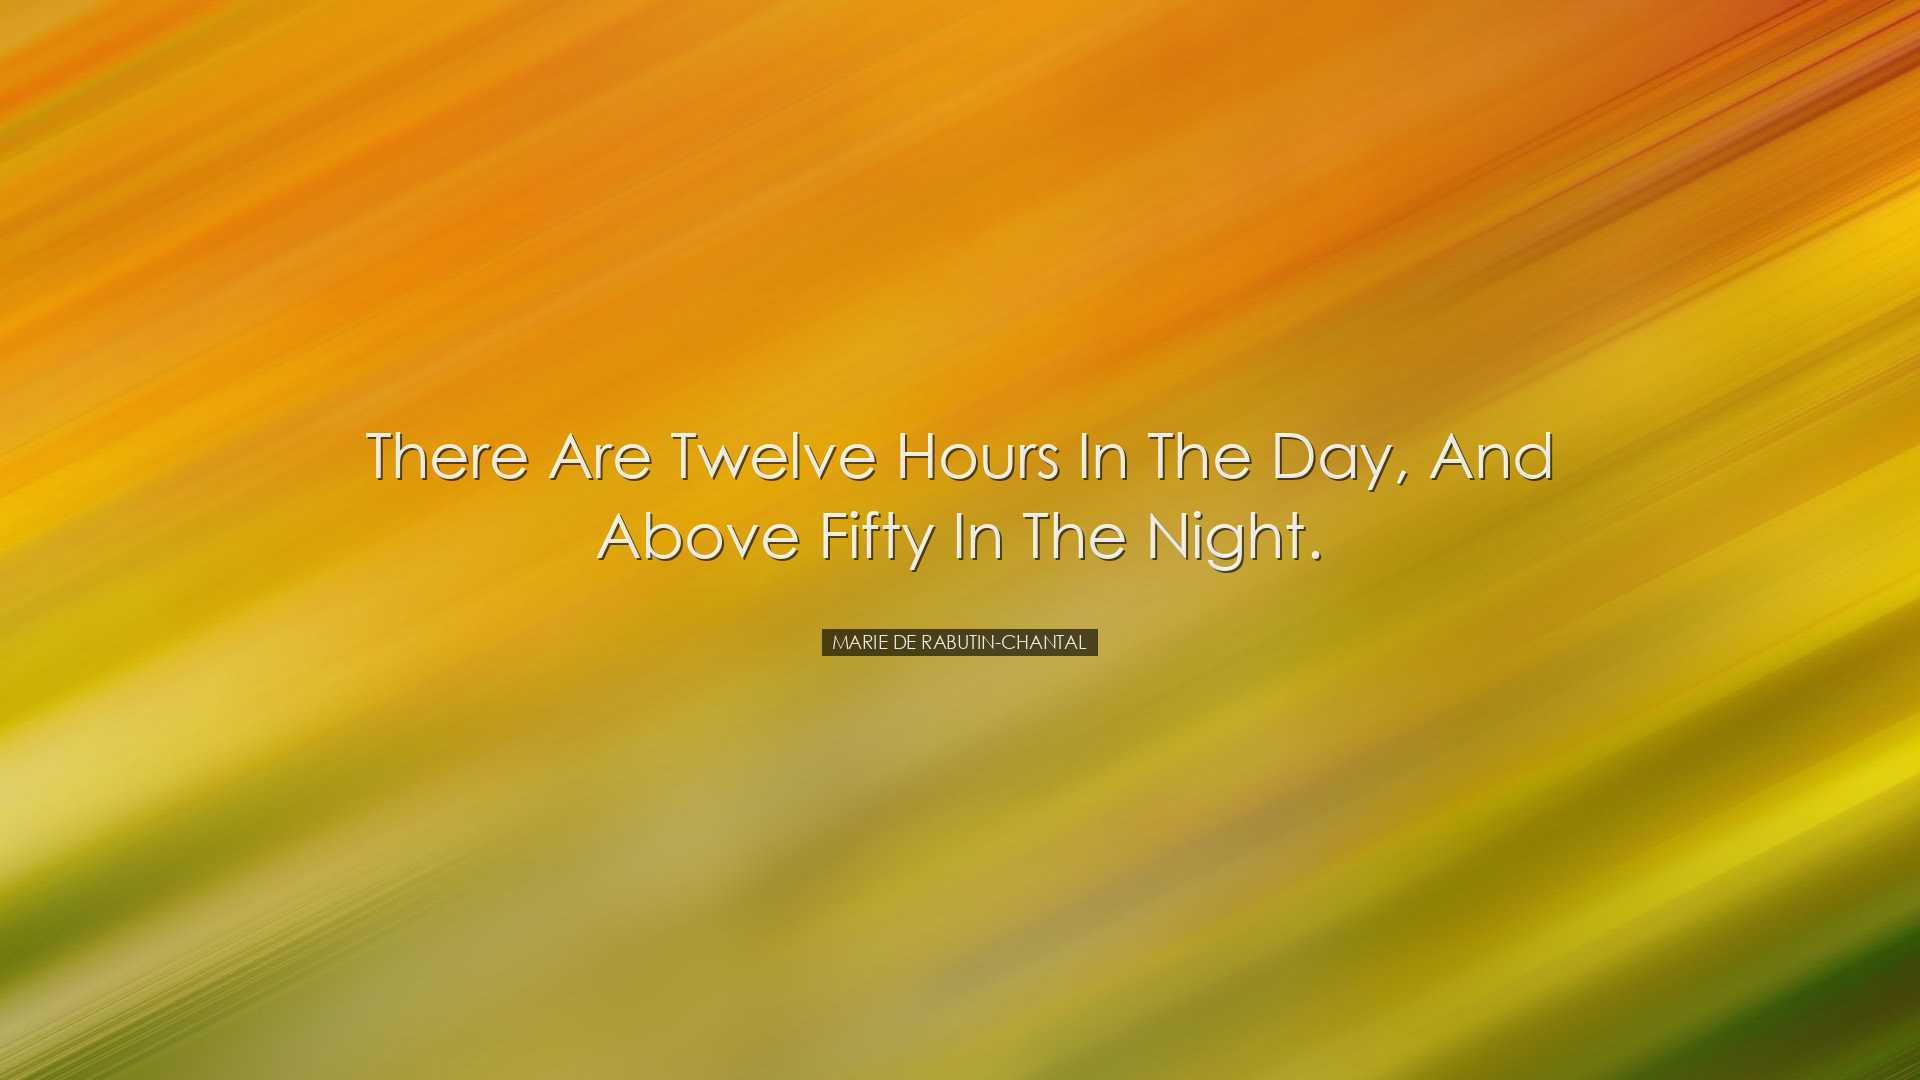 There are twelve hours in the day, and above fifty in the night. -